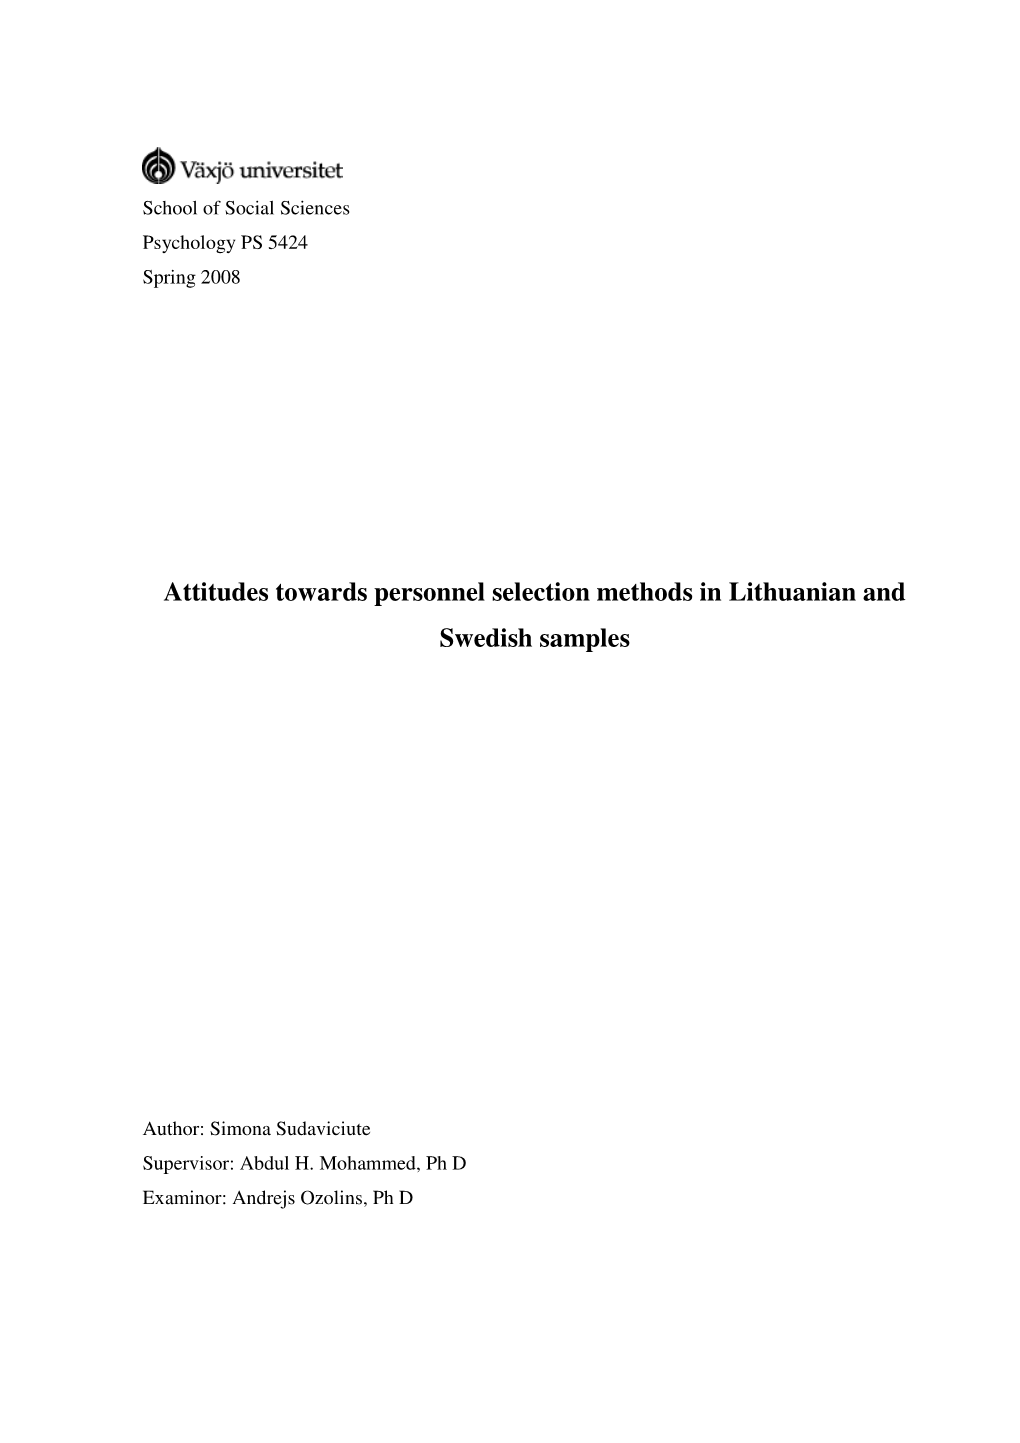 Attitudes Towards Personnel Selection Methods in Lithuanian and Swedish Samples